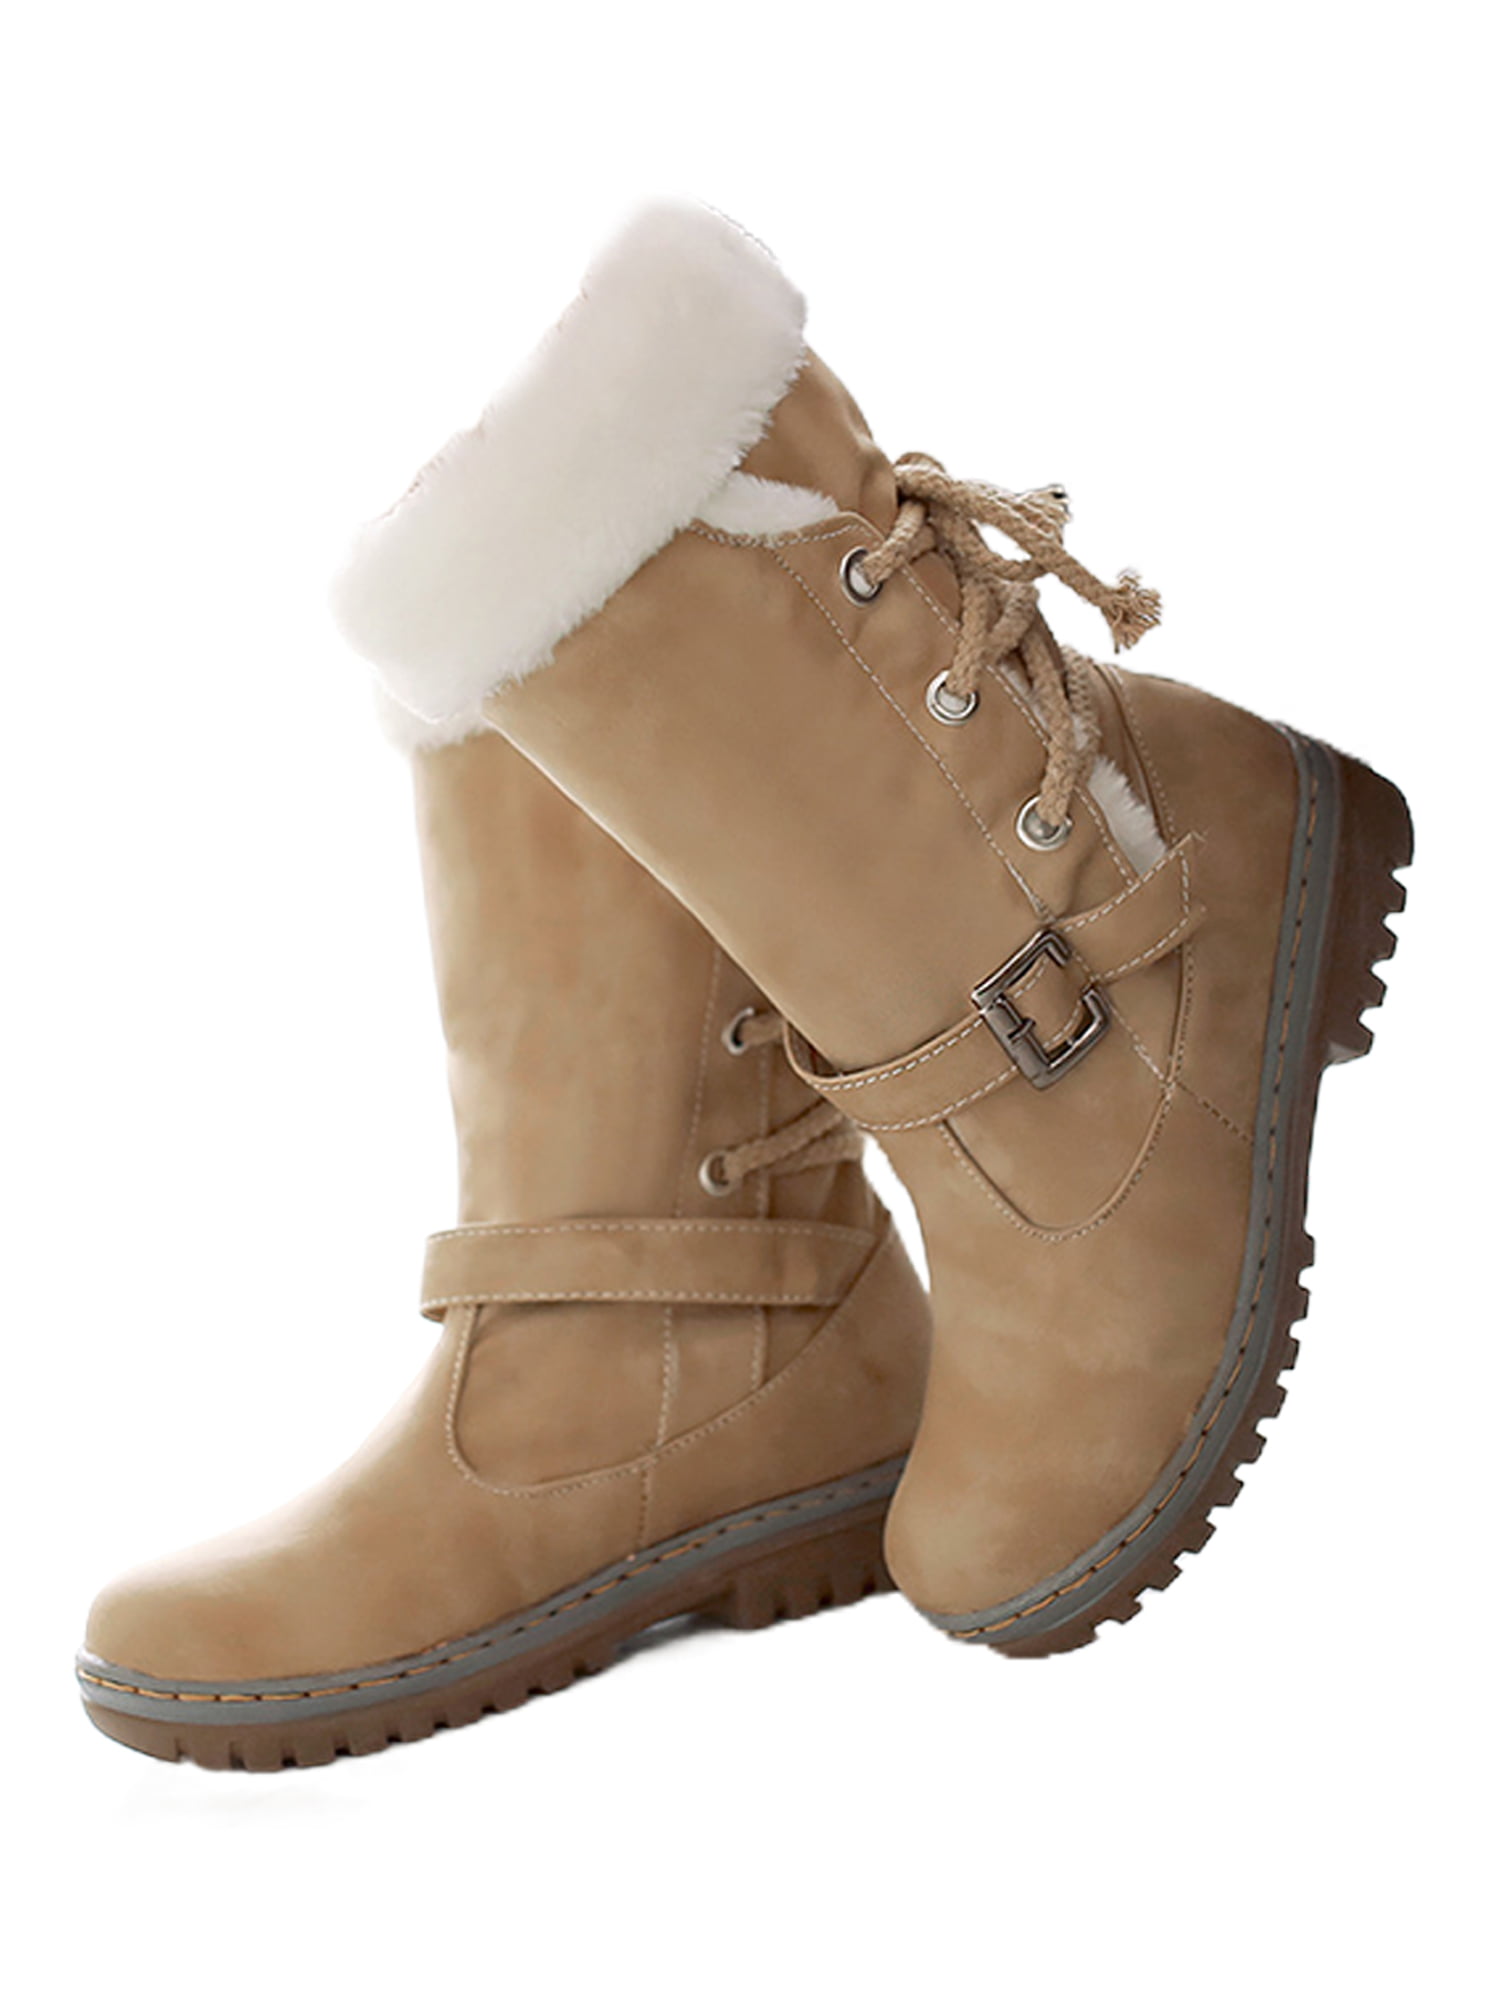 Women's Leather Snow Boots Mid Calf Casual Winter Warm Booties Ankle Shoes Size